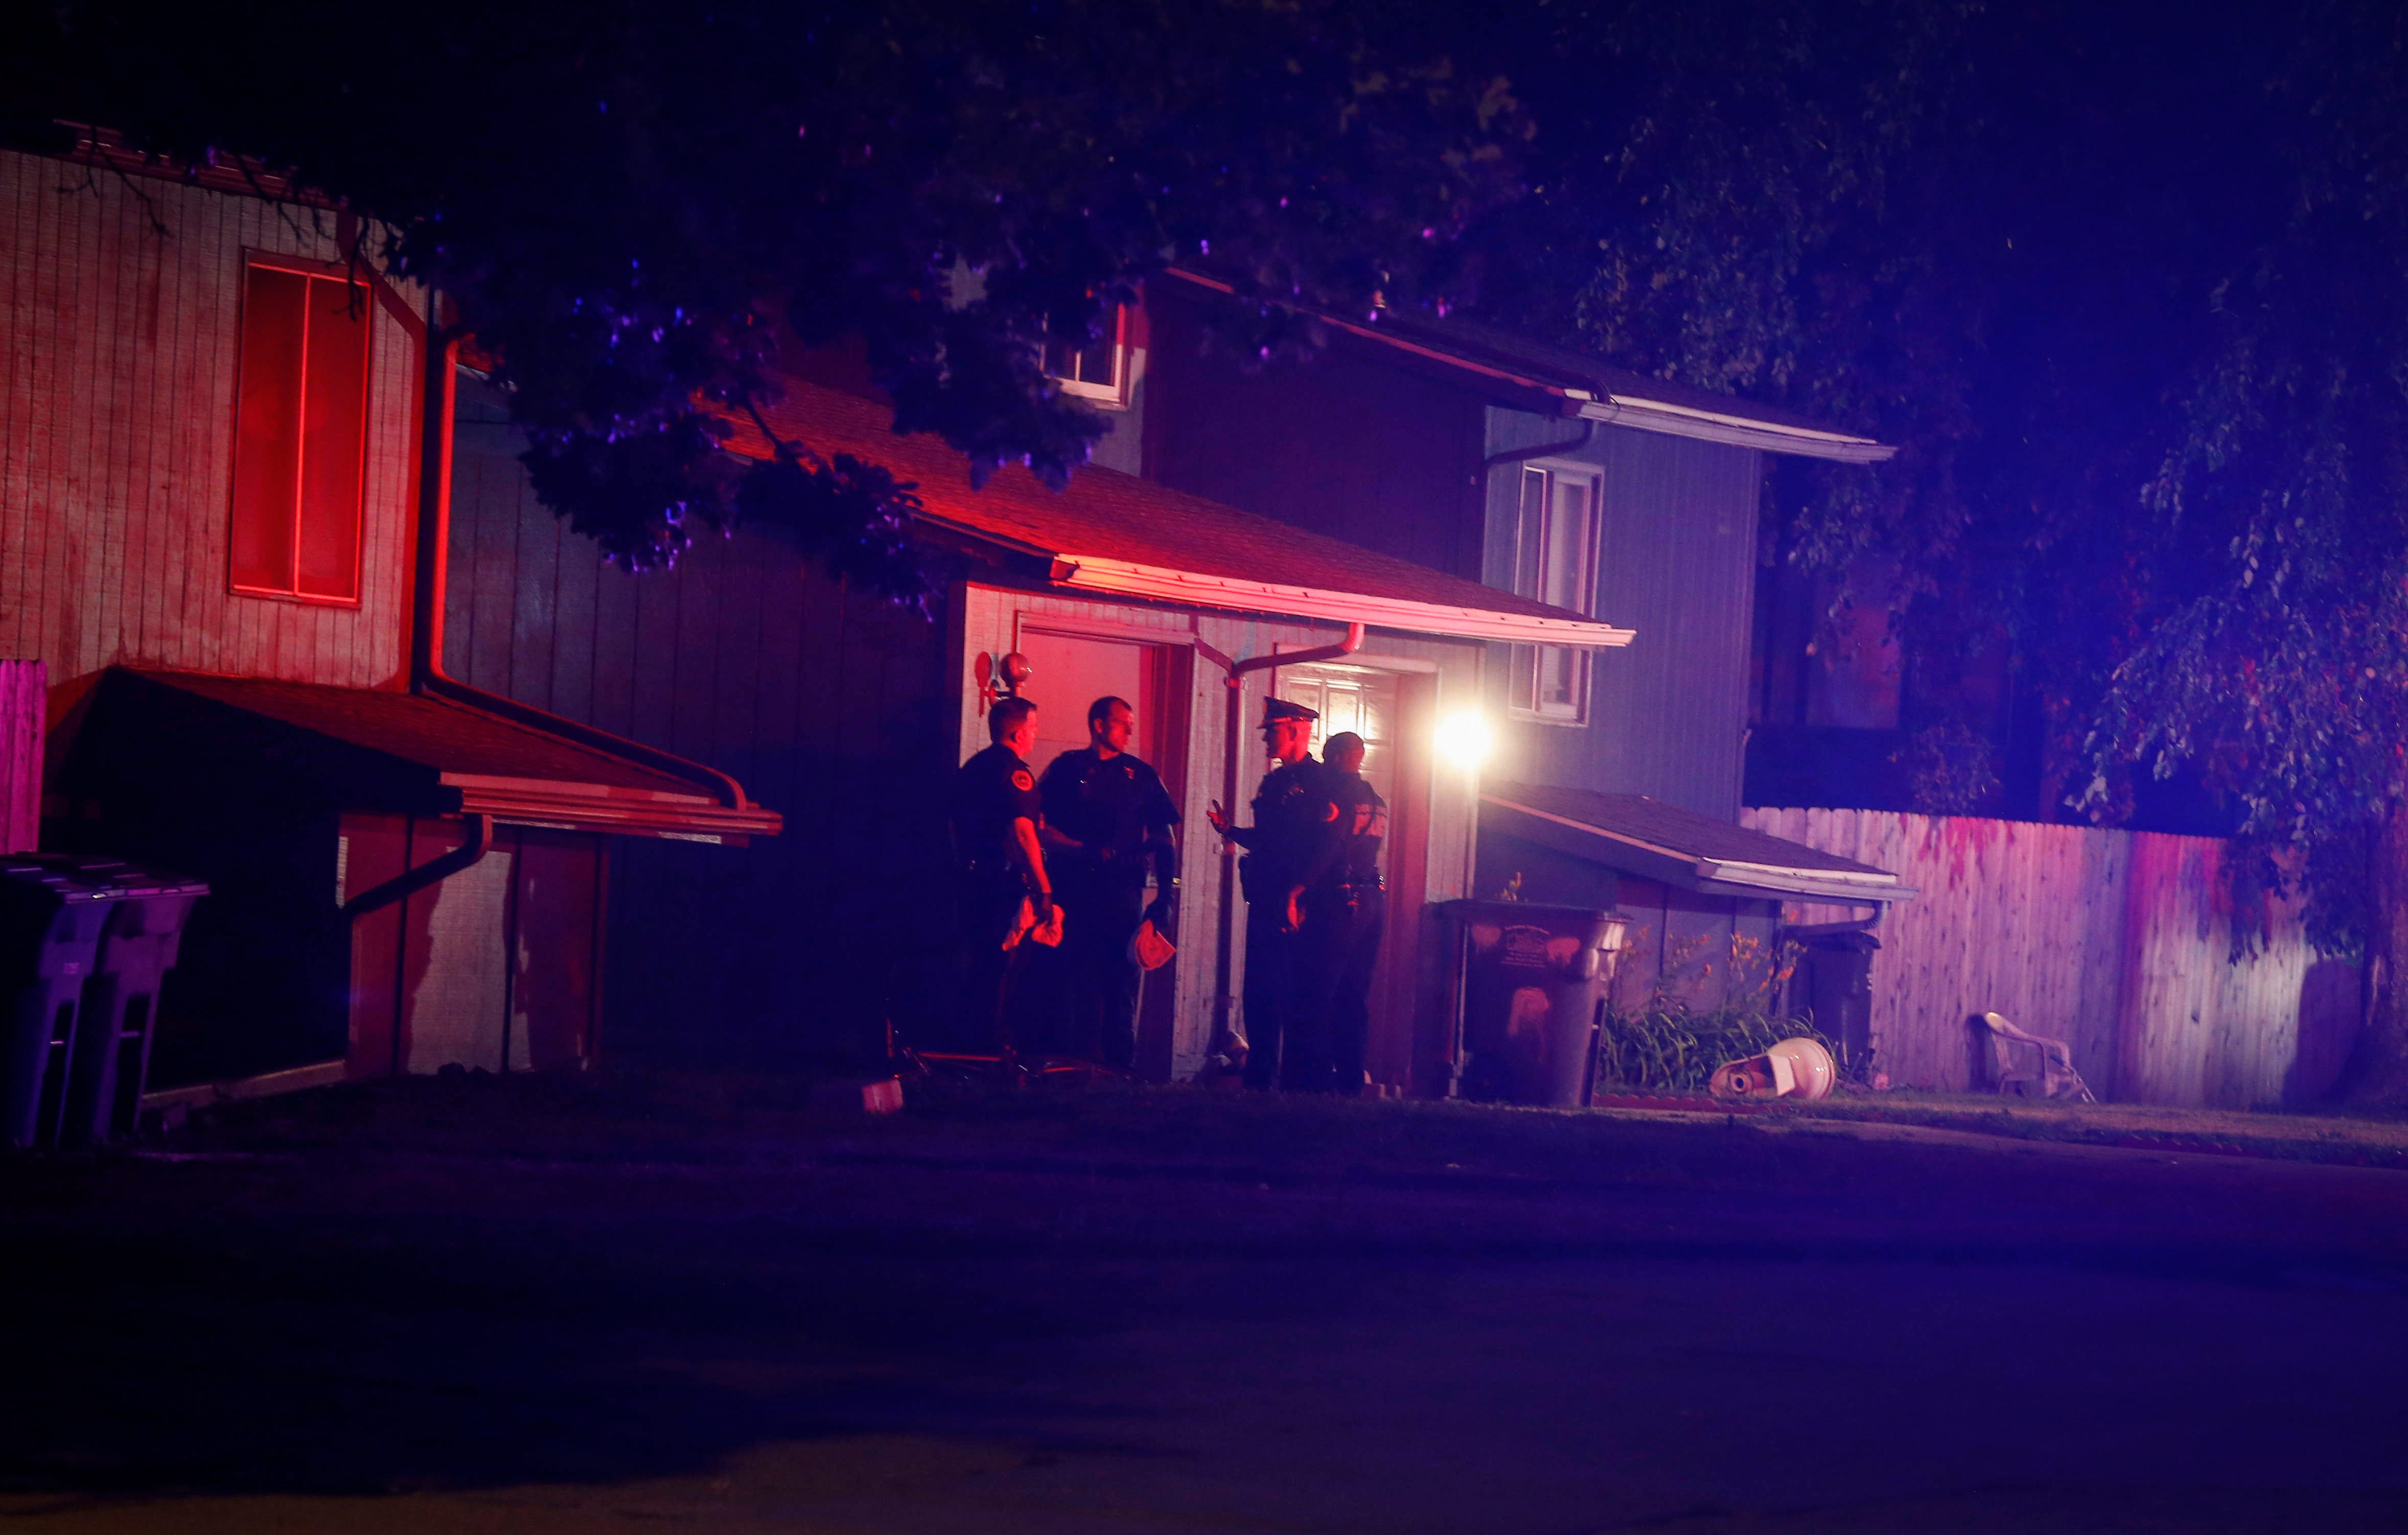 Des Moines police work the scene at a home on Day Street where multiple people were found deceased late on Tuesday, July16, 2019.